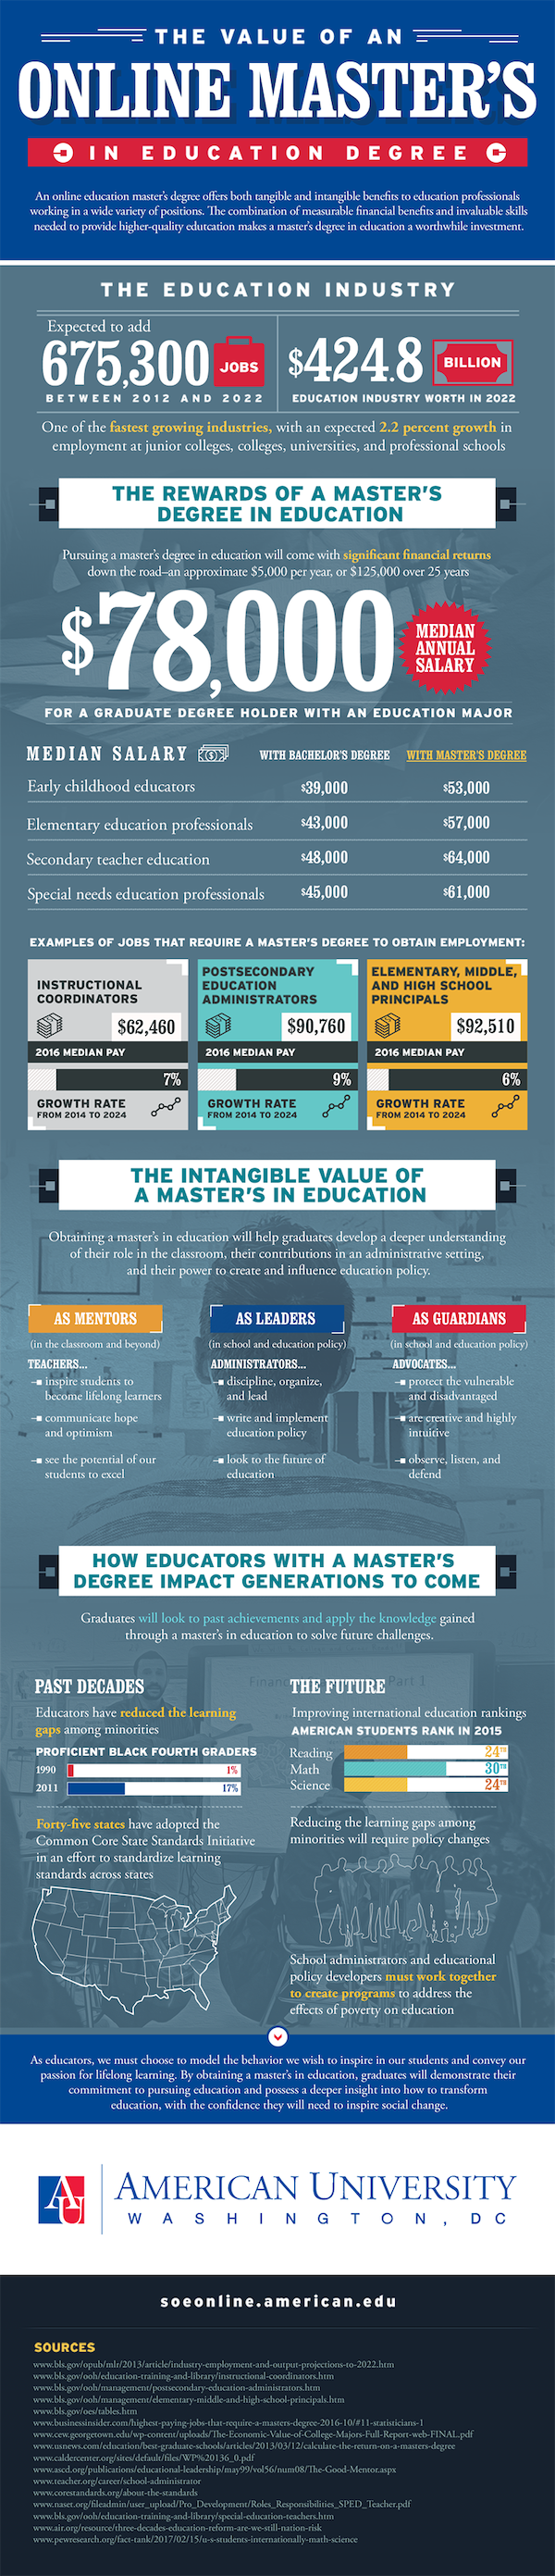 Infographic for The Value of an Online Master's in Education Degree